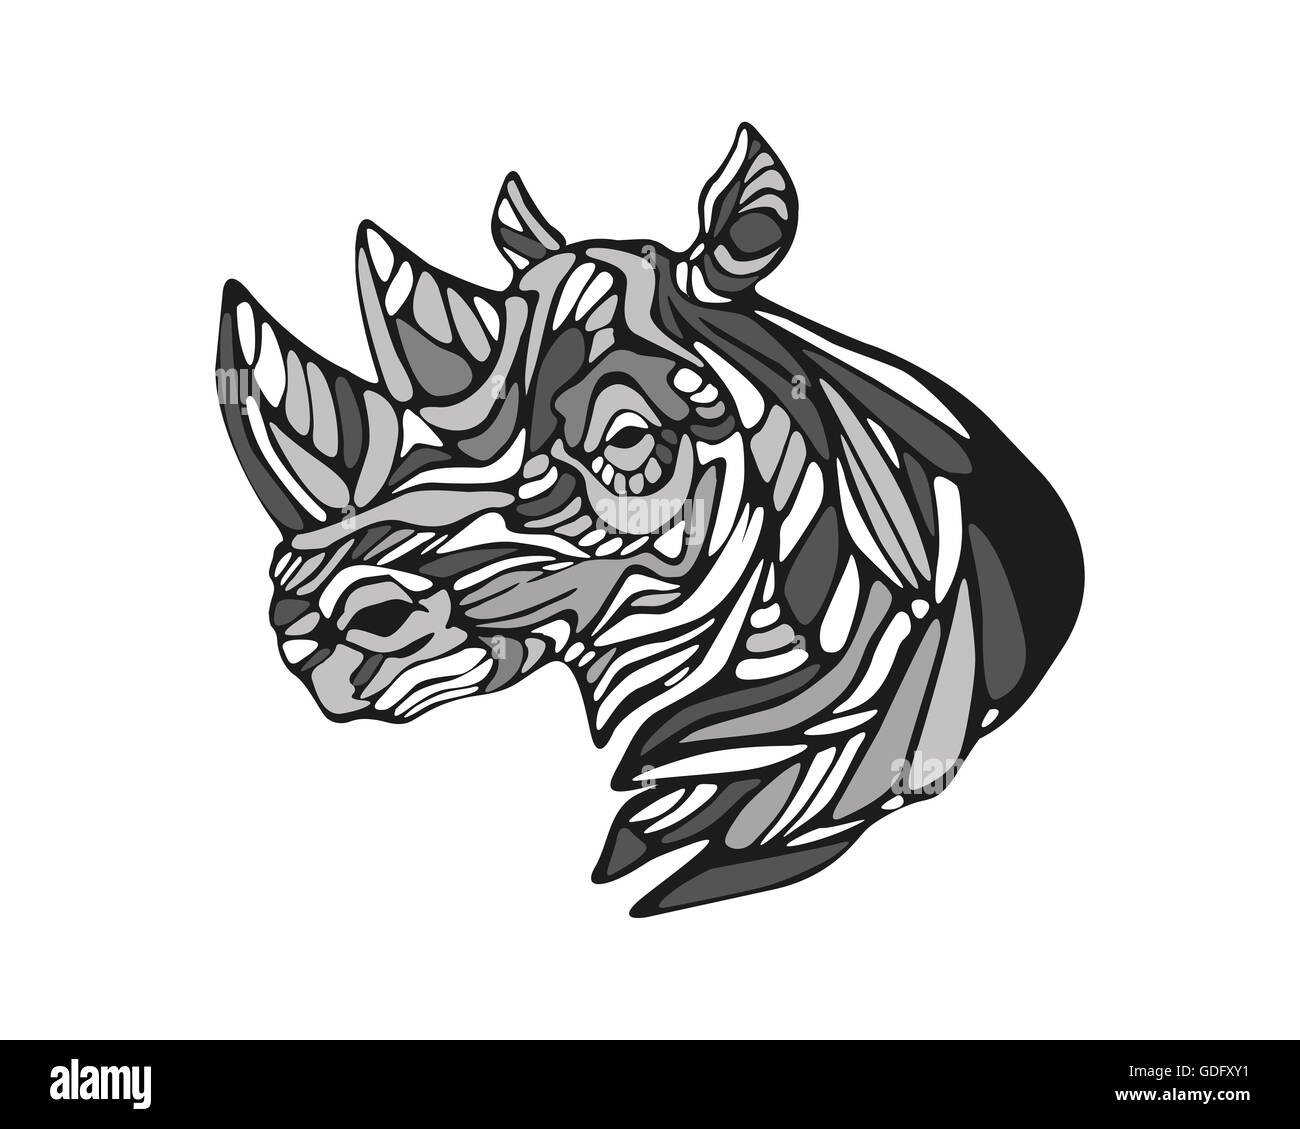 Hand drawn illustration or drawing of a rhino Stock Photo